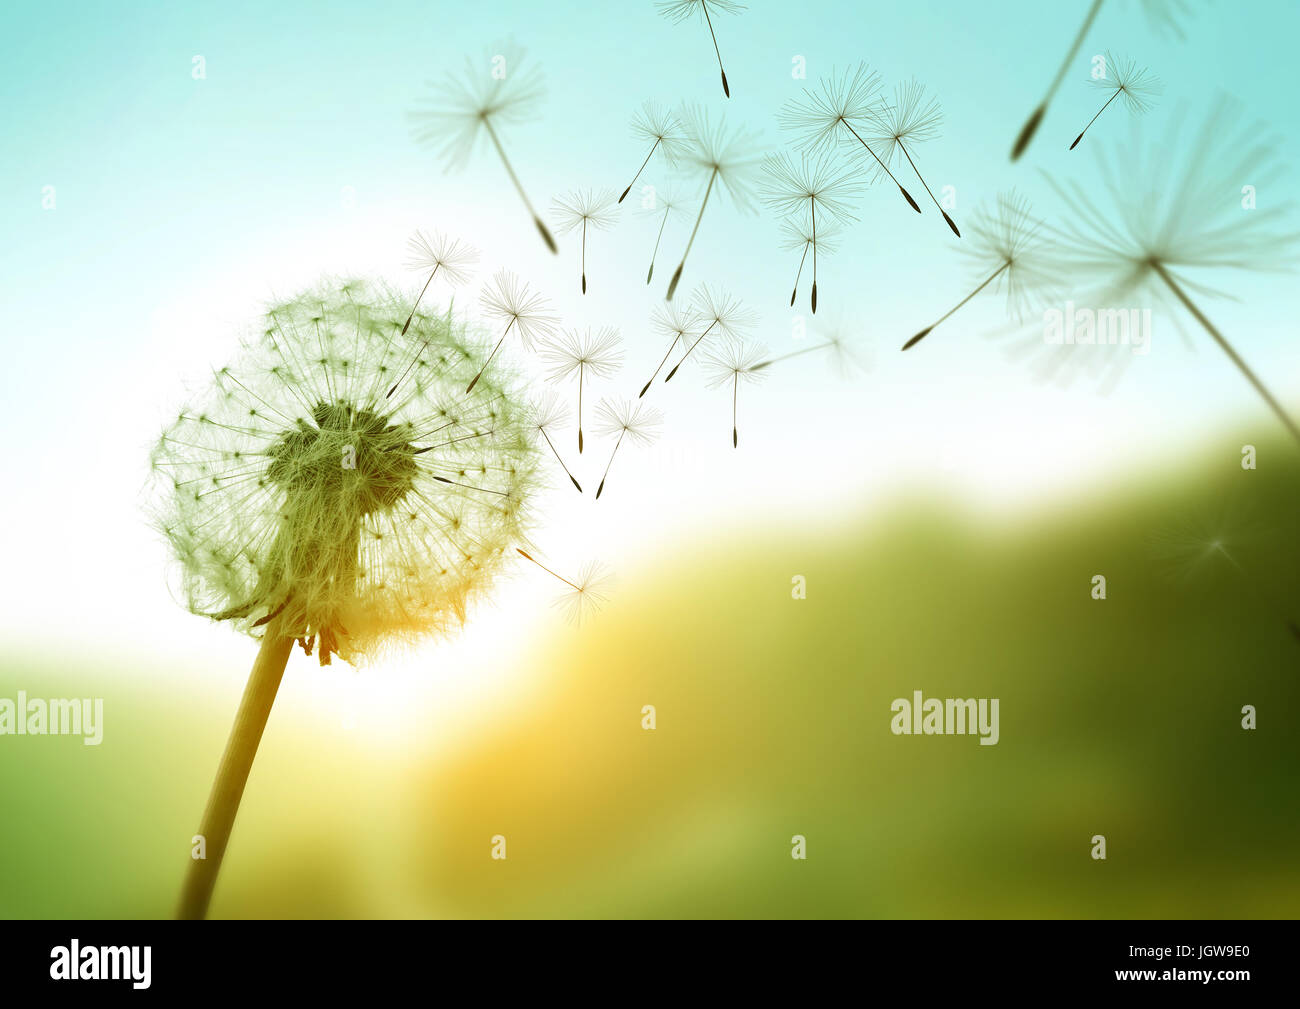 Dandelion seeds blowing in the wind across a summer field background, conceptual image meaning change, growth, movement and direction. Stock Photo